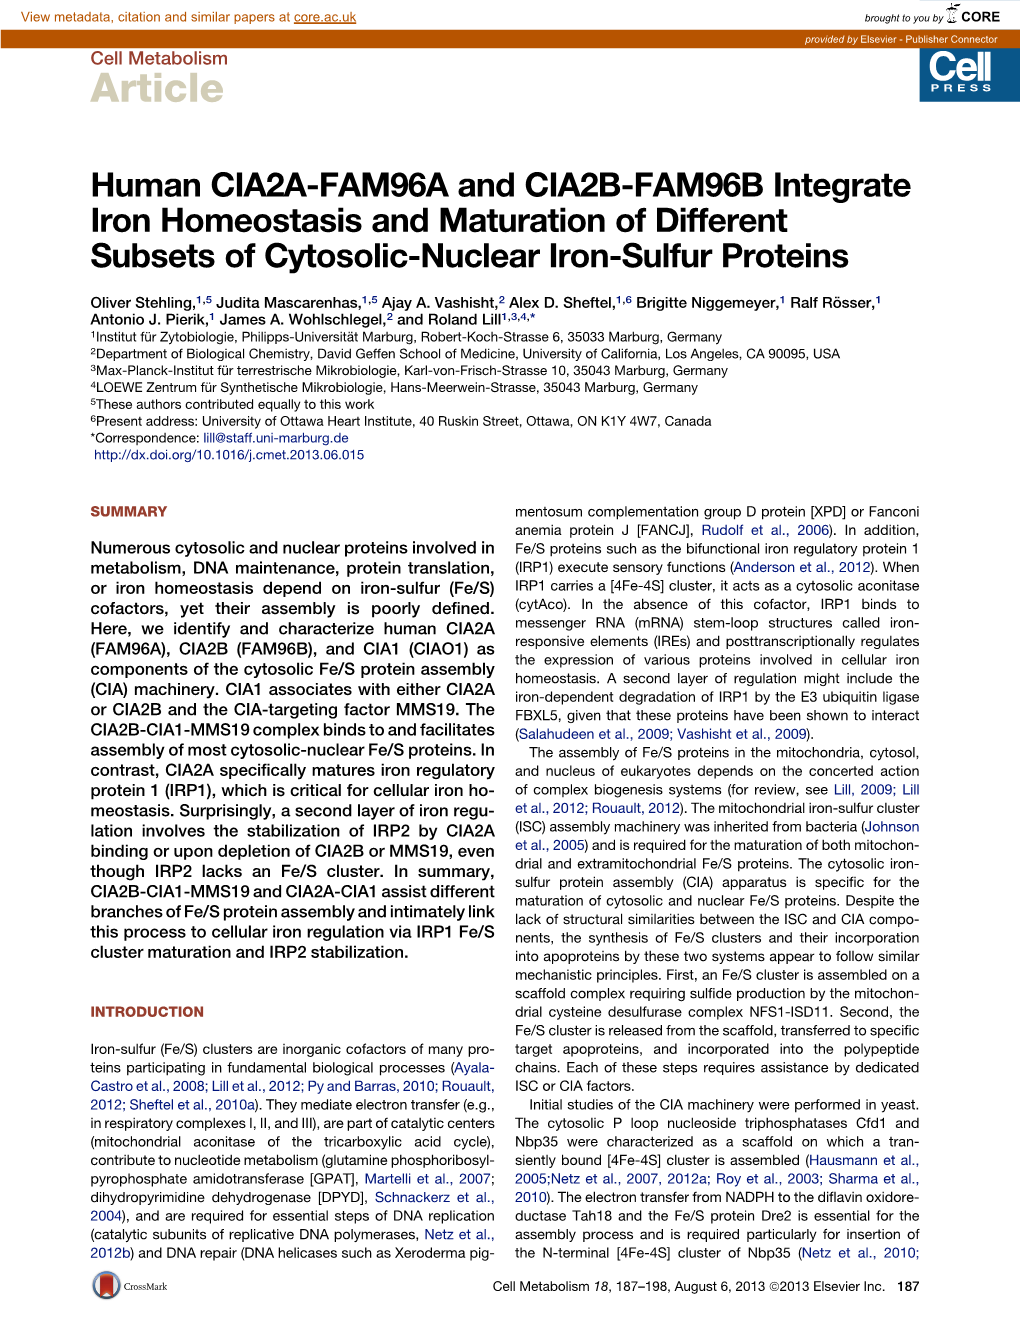 Human CIA2A-FAM96A and CIA2B-FAM96B Integrate Iron Homeostasis and Maturation of Different Subsets of Cytosolic-Nuclear Iron-Sulfur Proteins